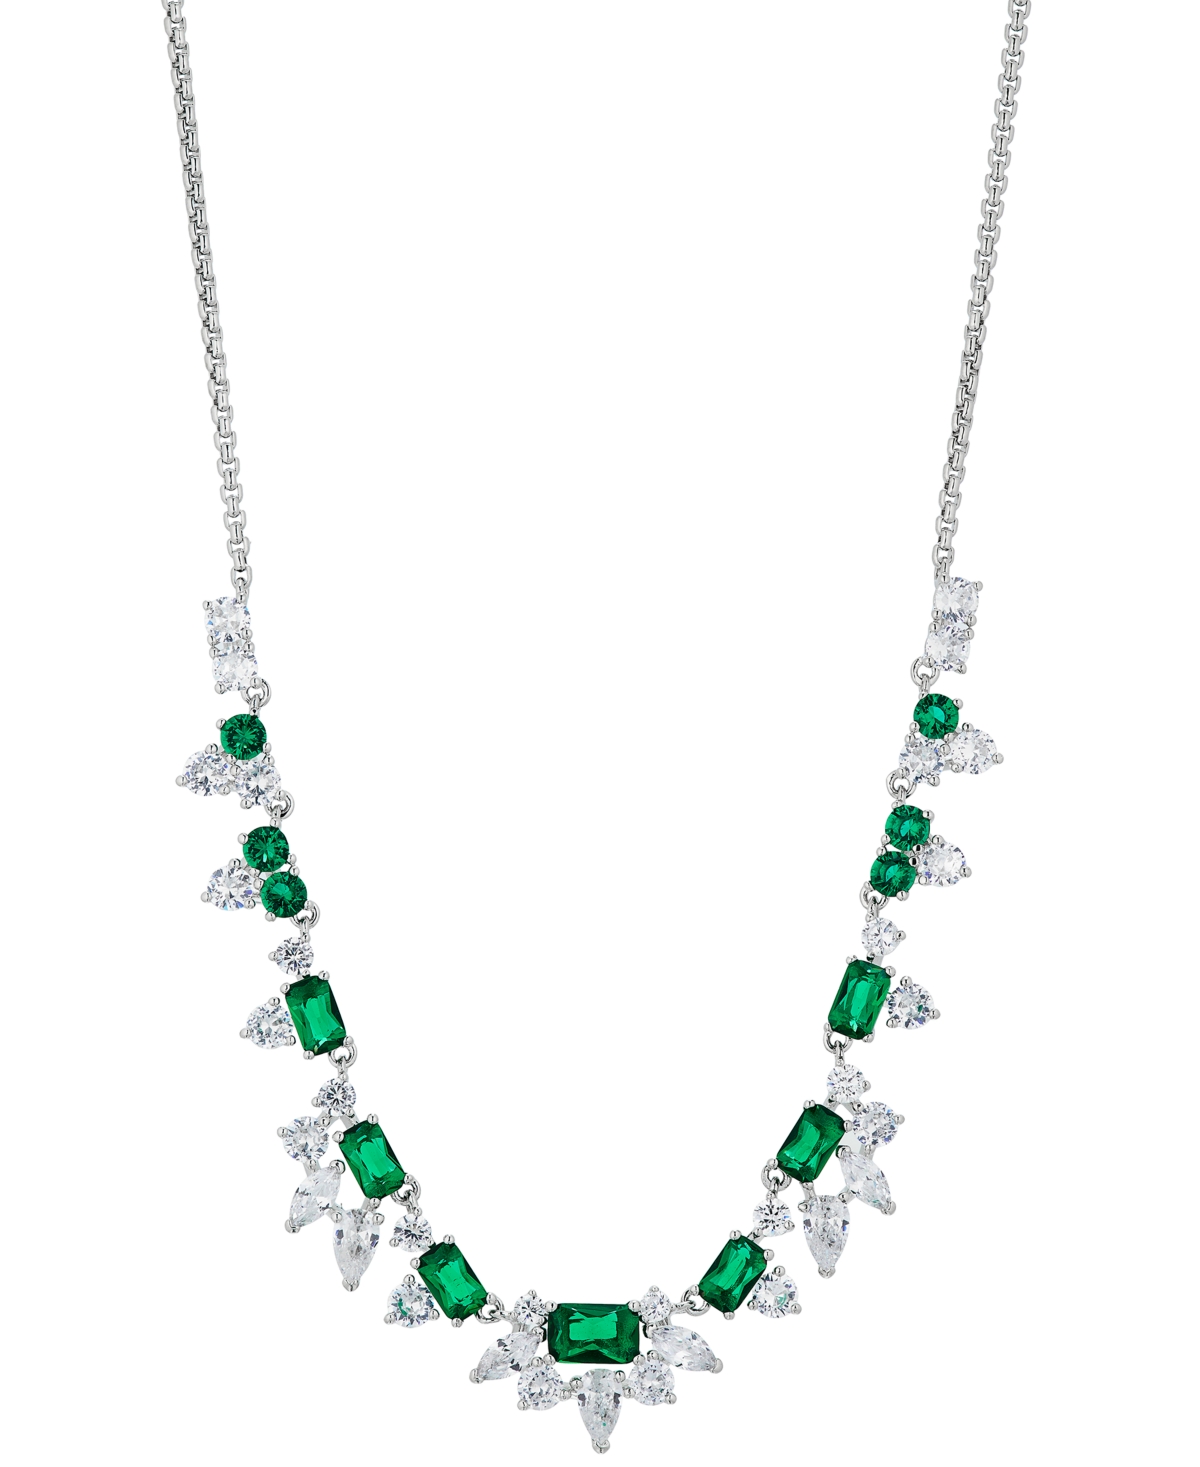 Silver-Tone Crystal Cluster Frontal Necklace, 16" + 2" extender - Green